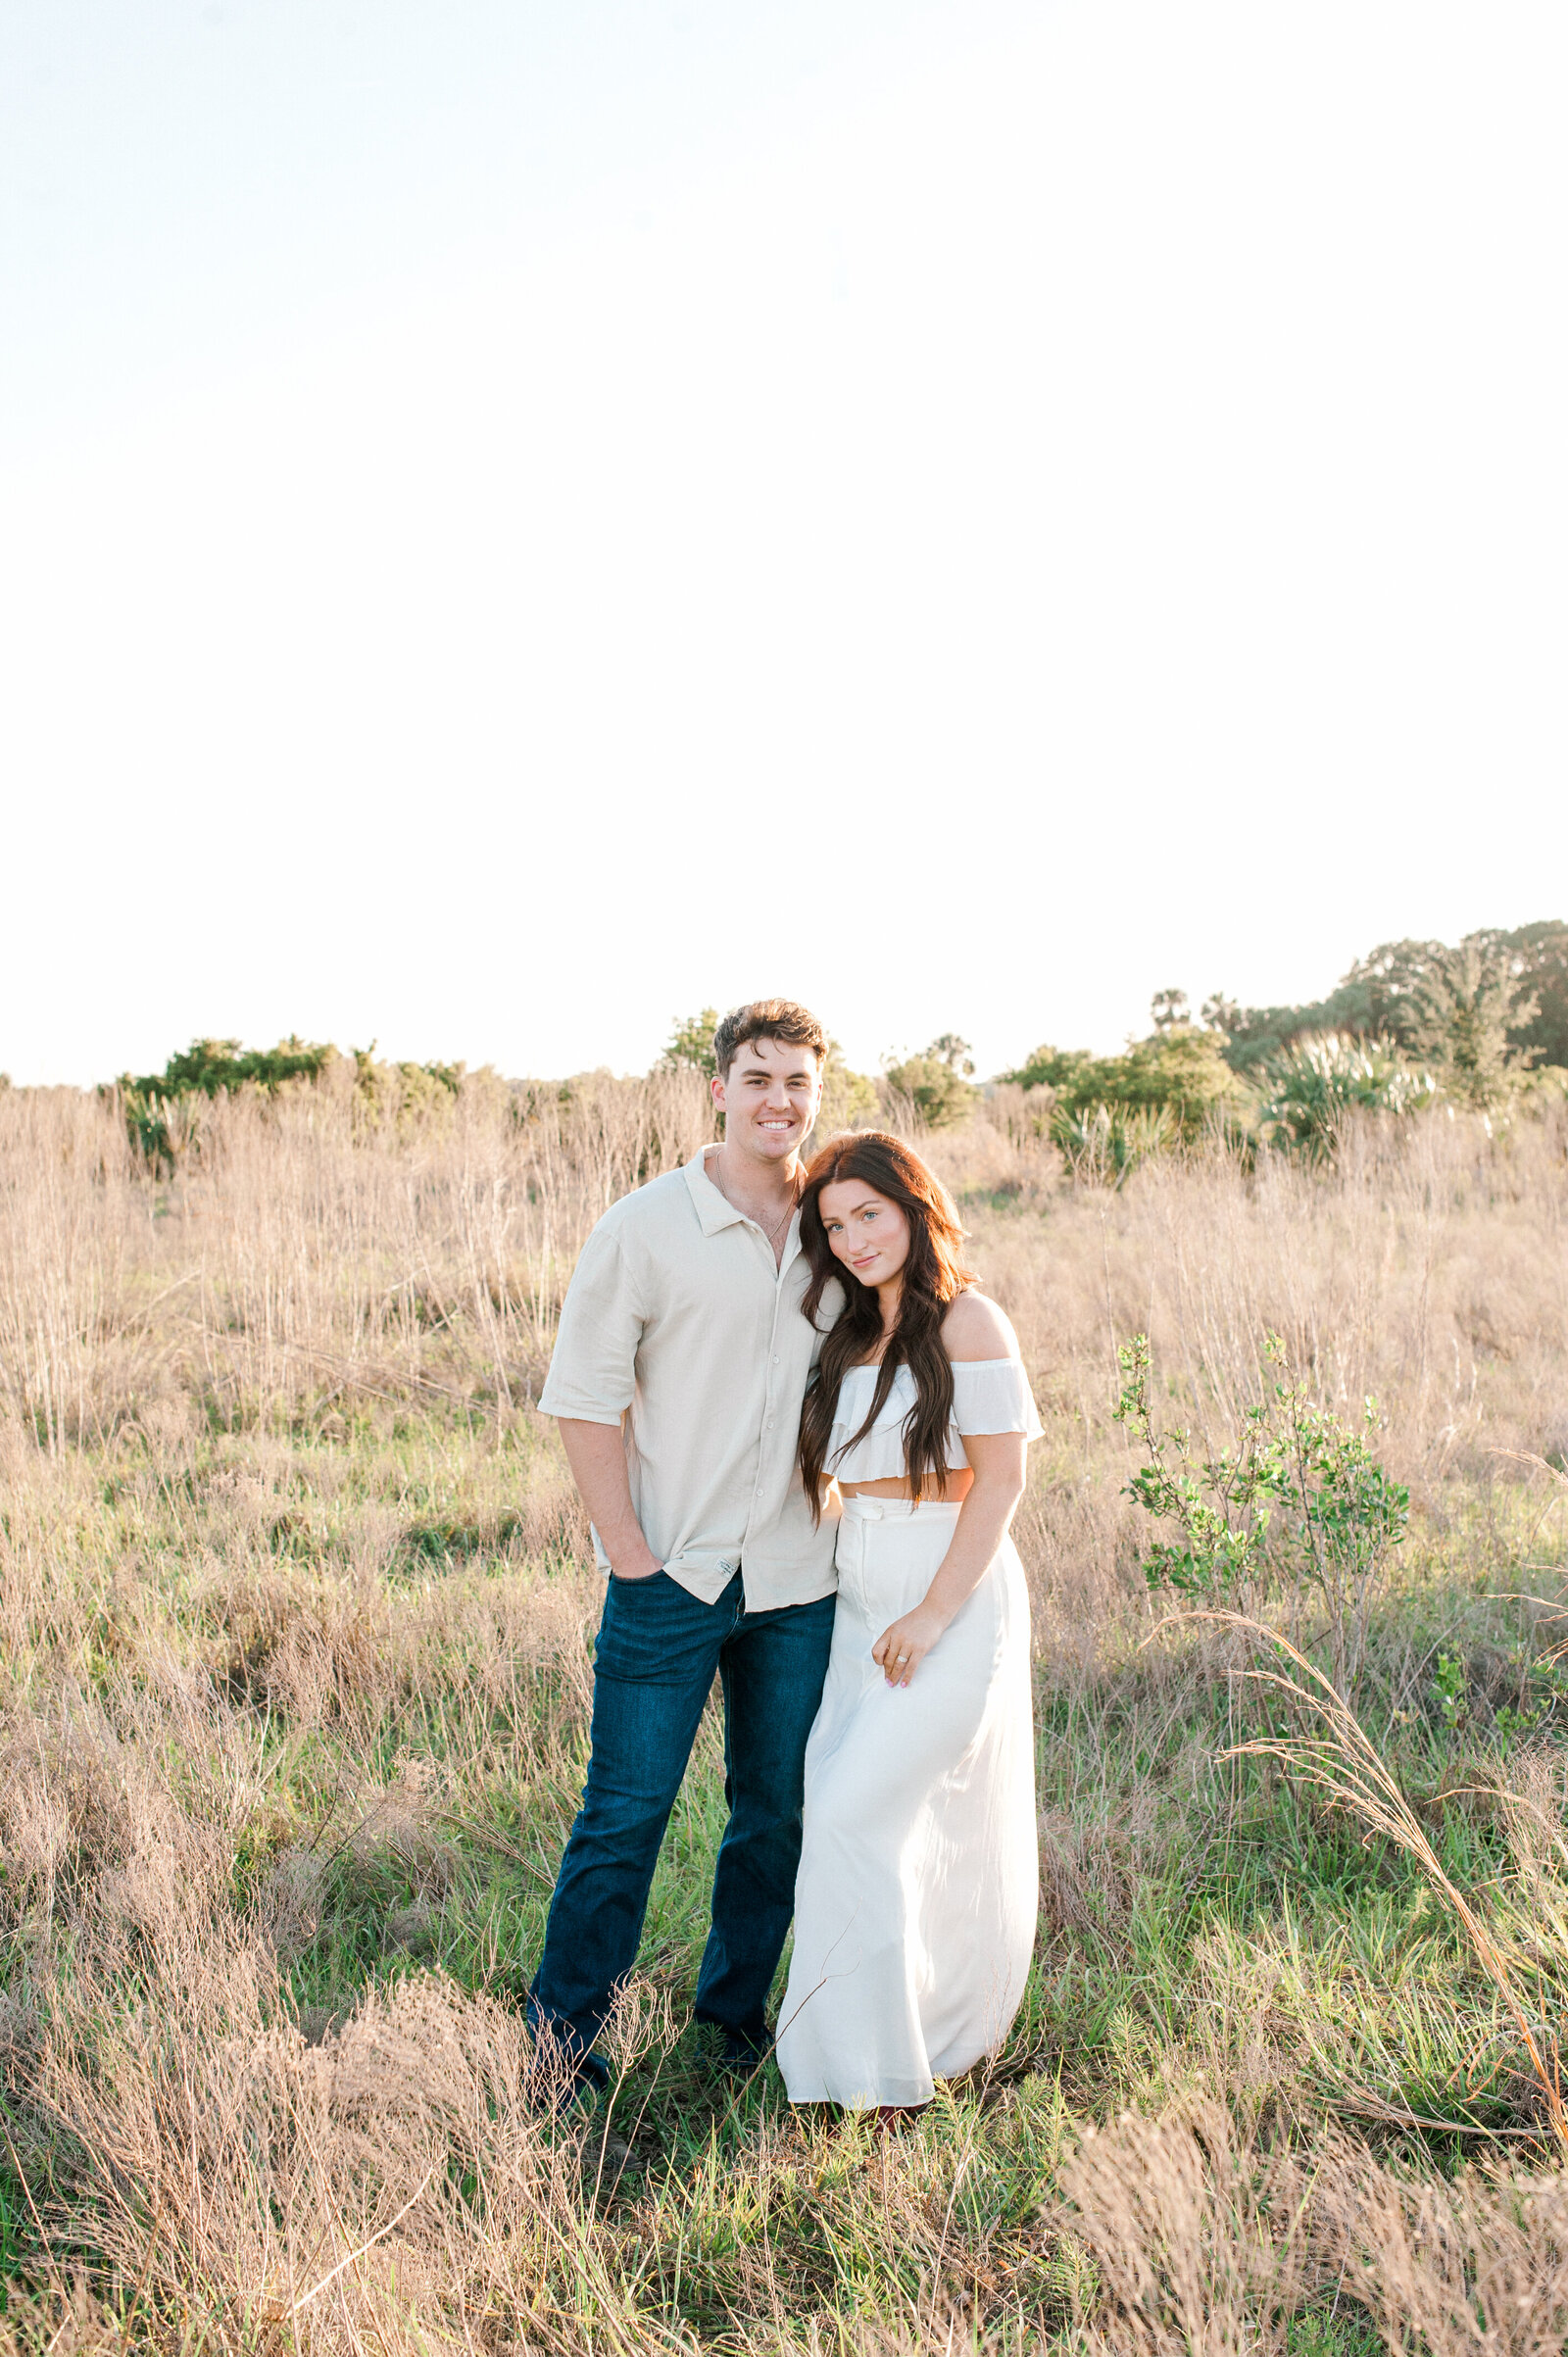 Portrait of a couple standing in a tall grass field smiling at the camera